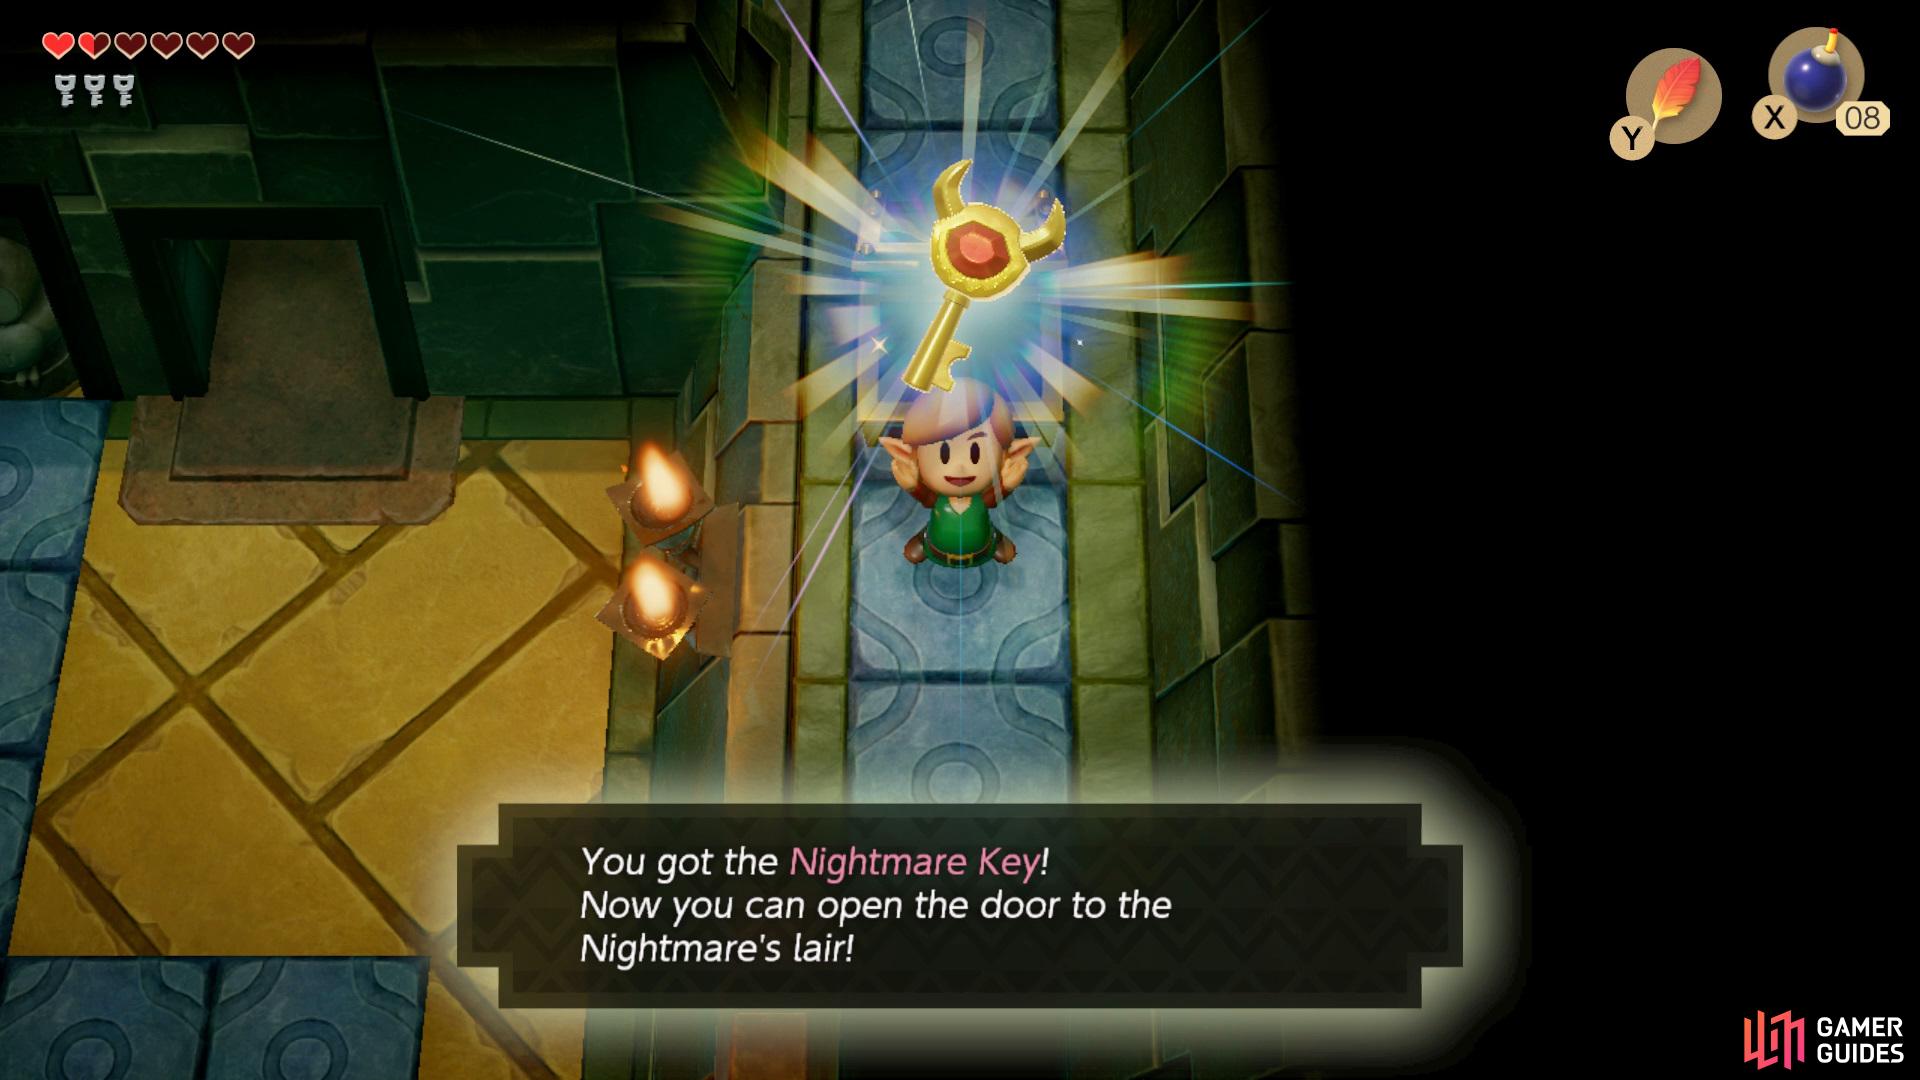 then head upstairs and open the Chest to get the Nightmare Key,